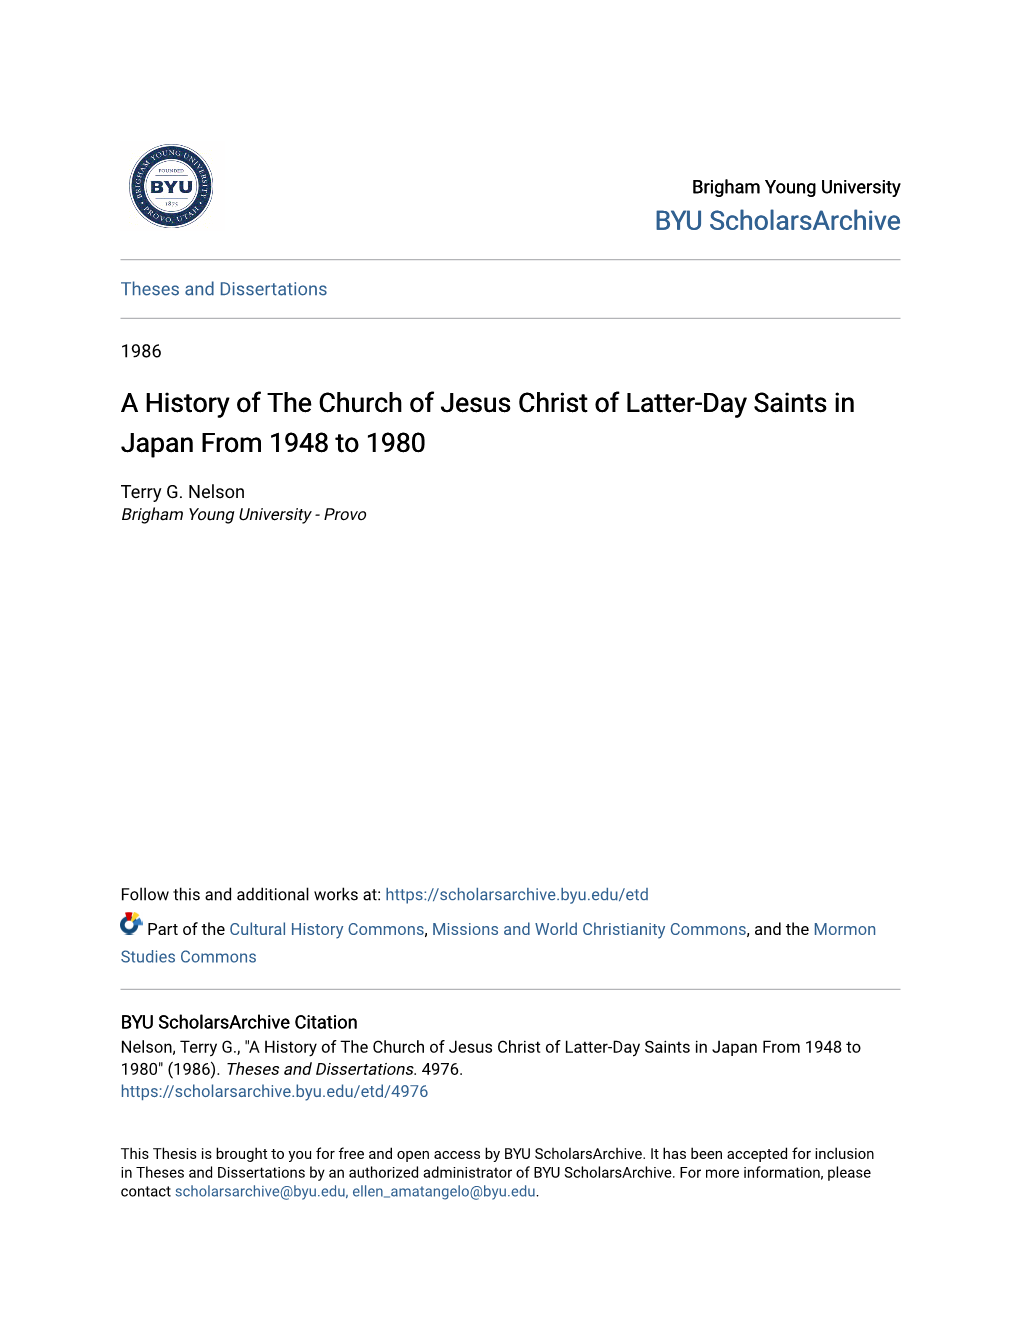 A History of the Church of Jesus Christ of Latter-Day Saints in Japan from 1948 to 1980